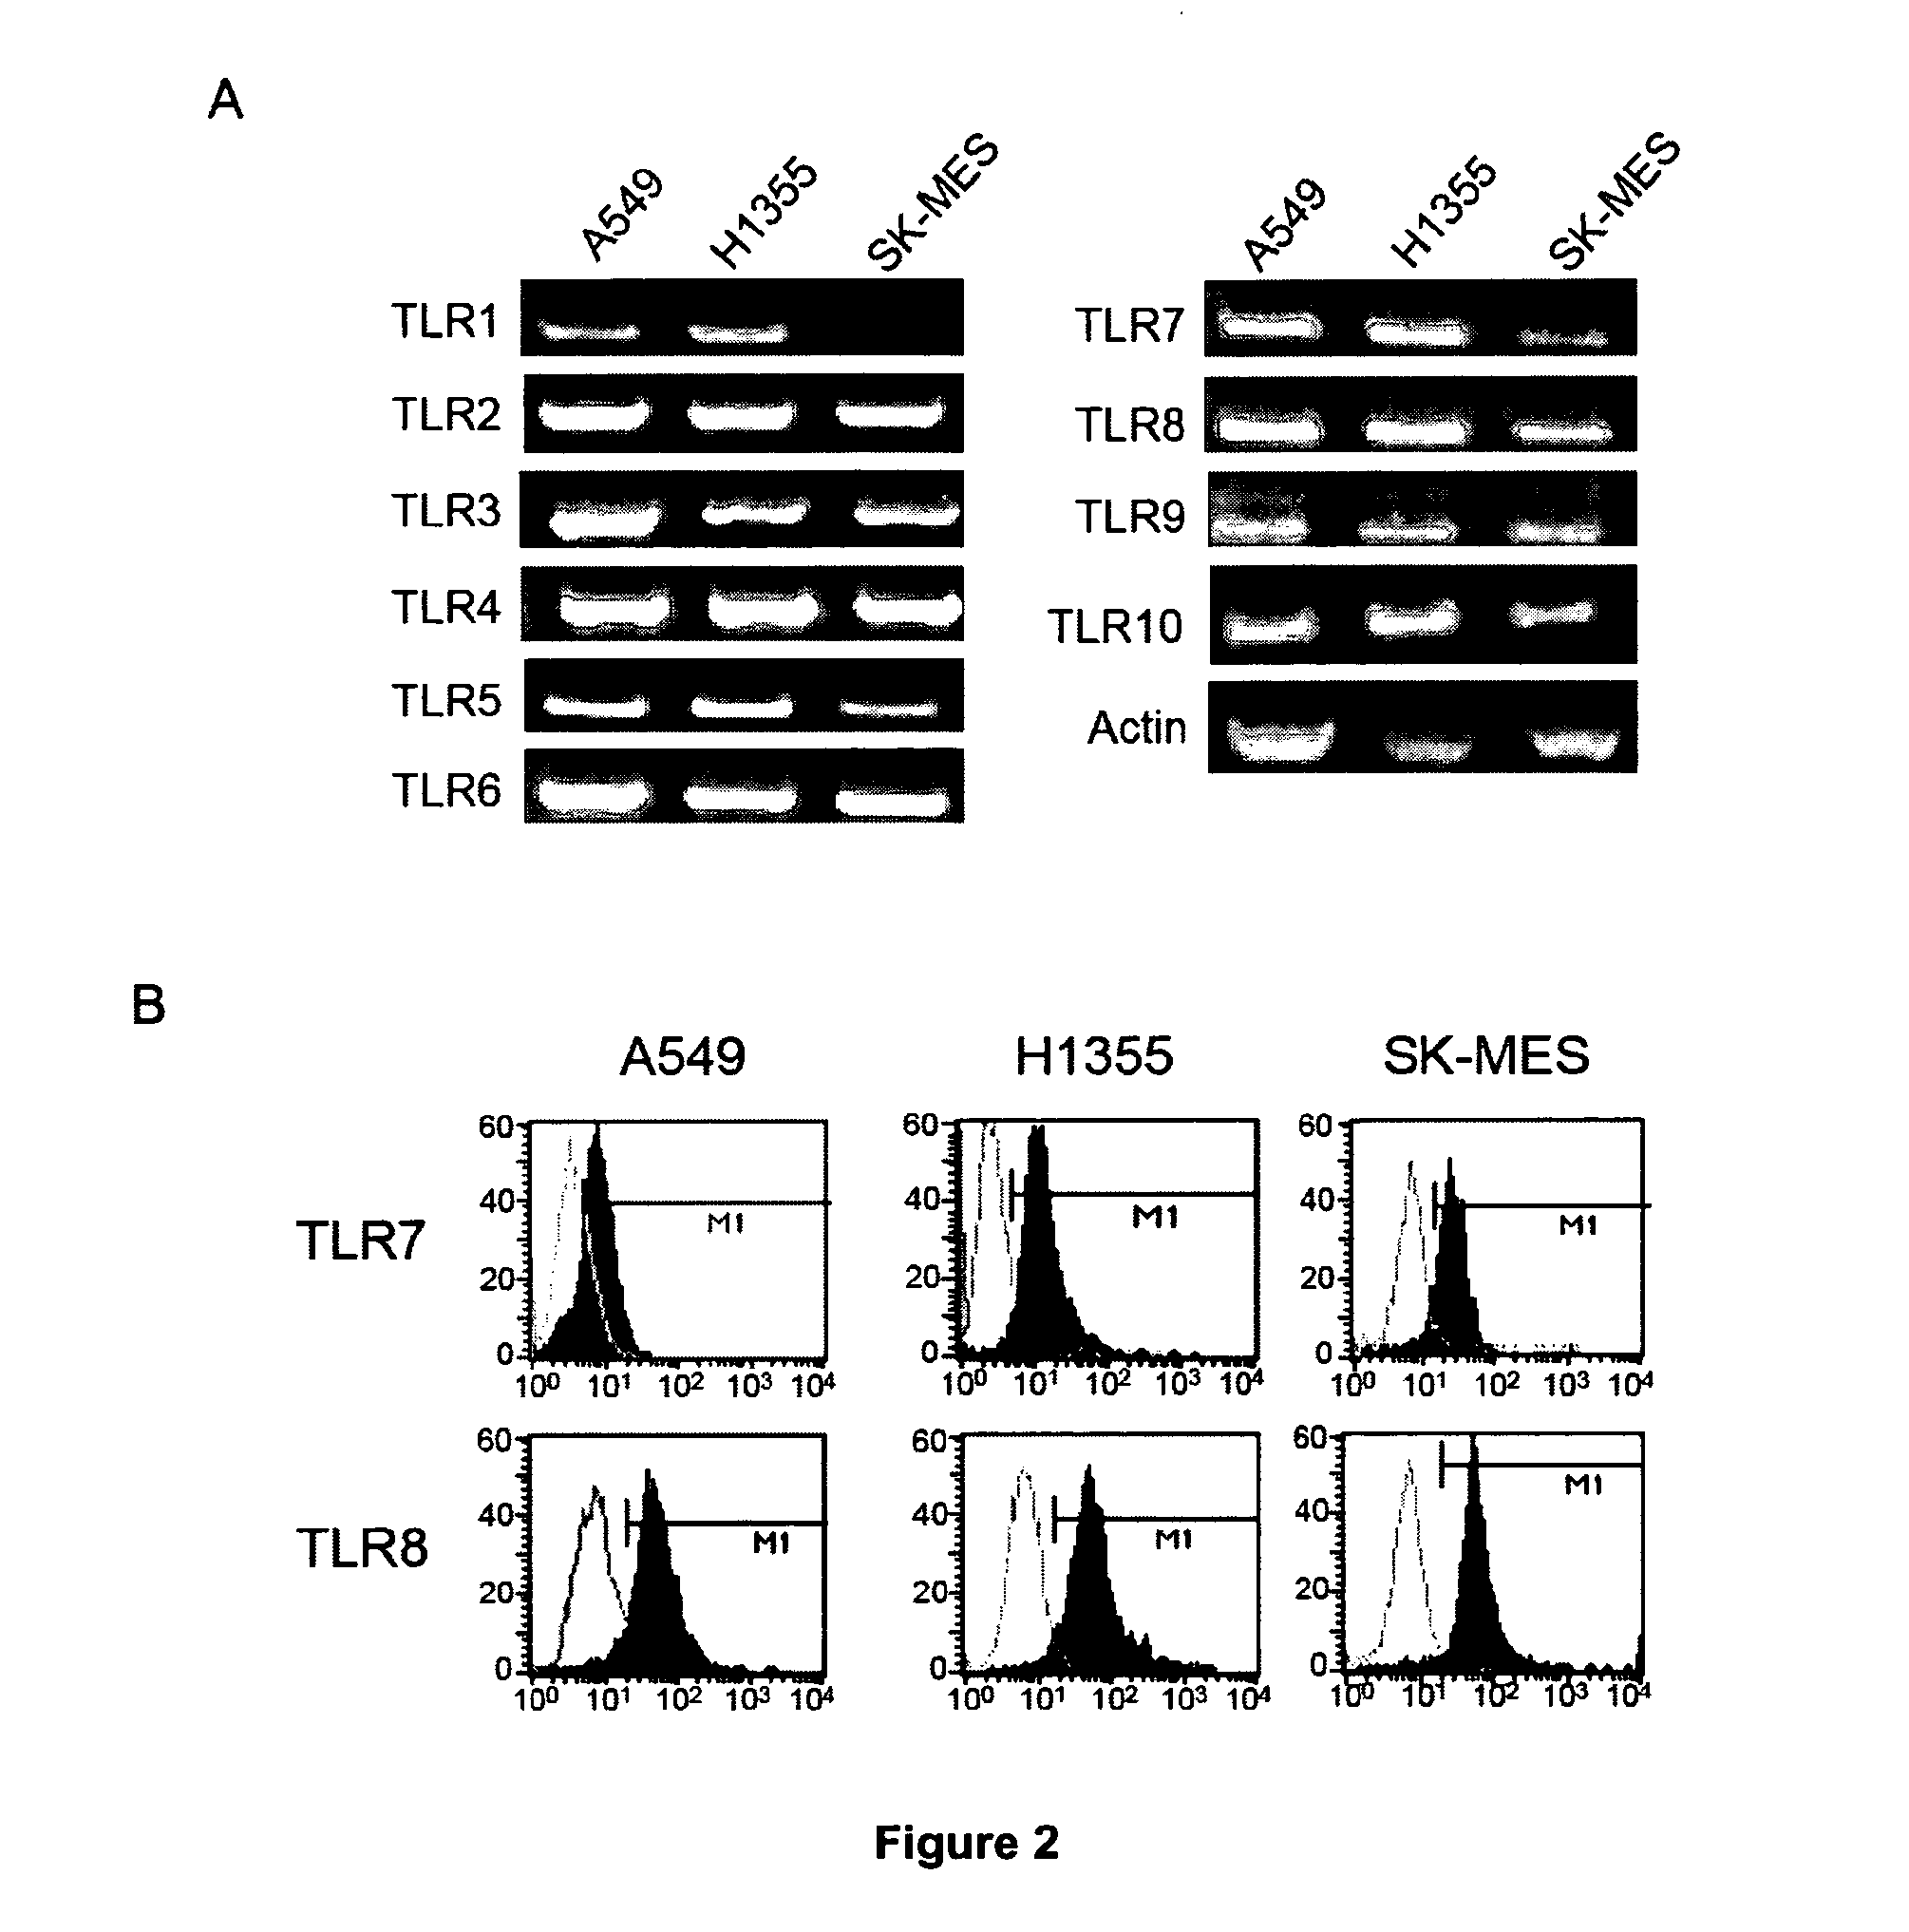 Methods for Predicting the Response to Anti-Cancer Treatment with an Agonist of TLR7 or an Agonist of TLR8